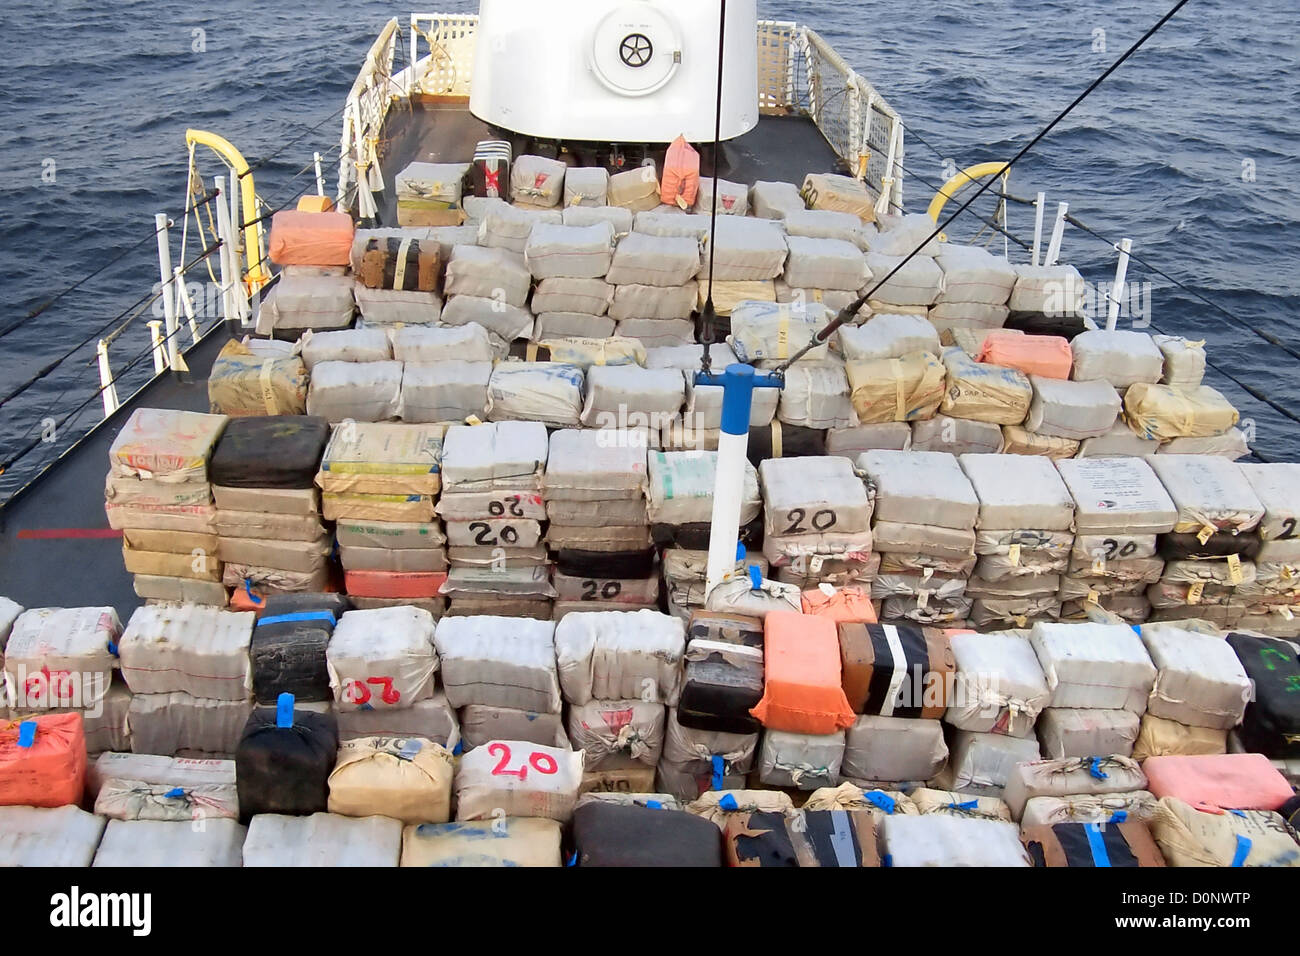 Cocaine On Deck of Freighter Stock Photo